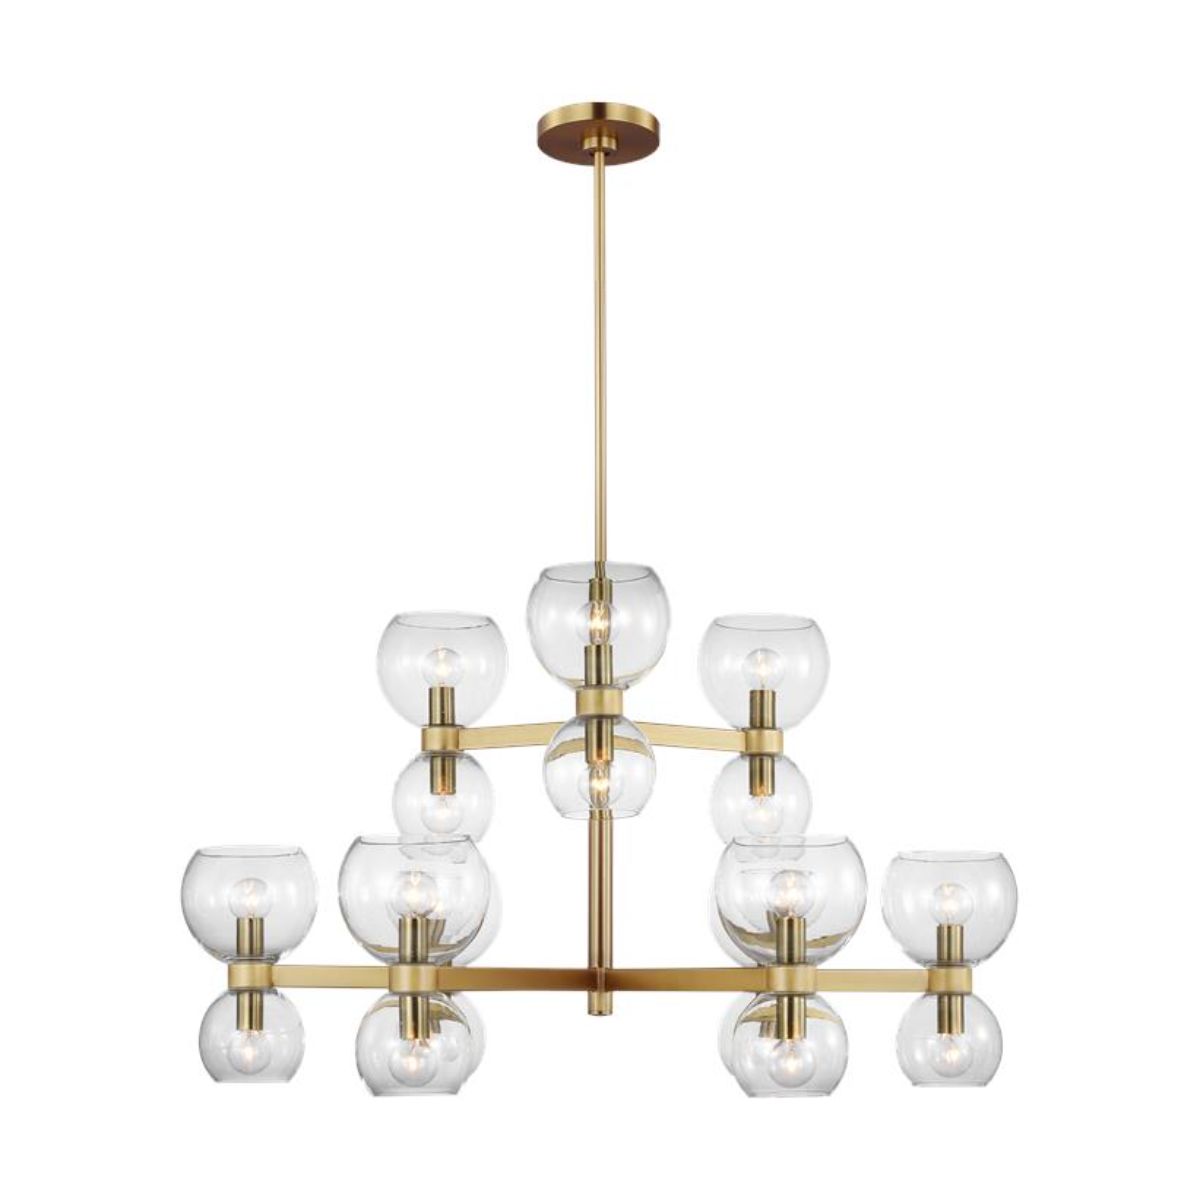 Londyn 37 in. 18 Lights Chandelier Brushed Brass finish Clear Shade